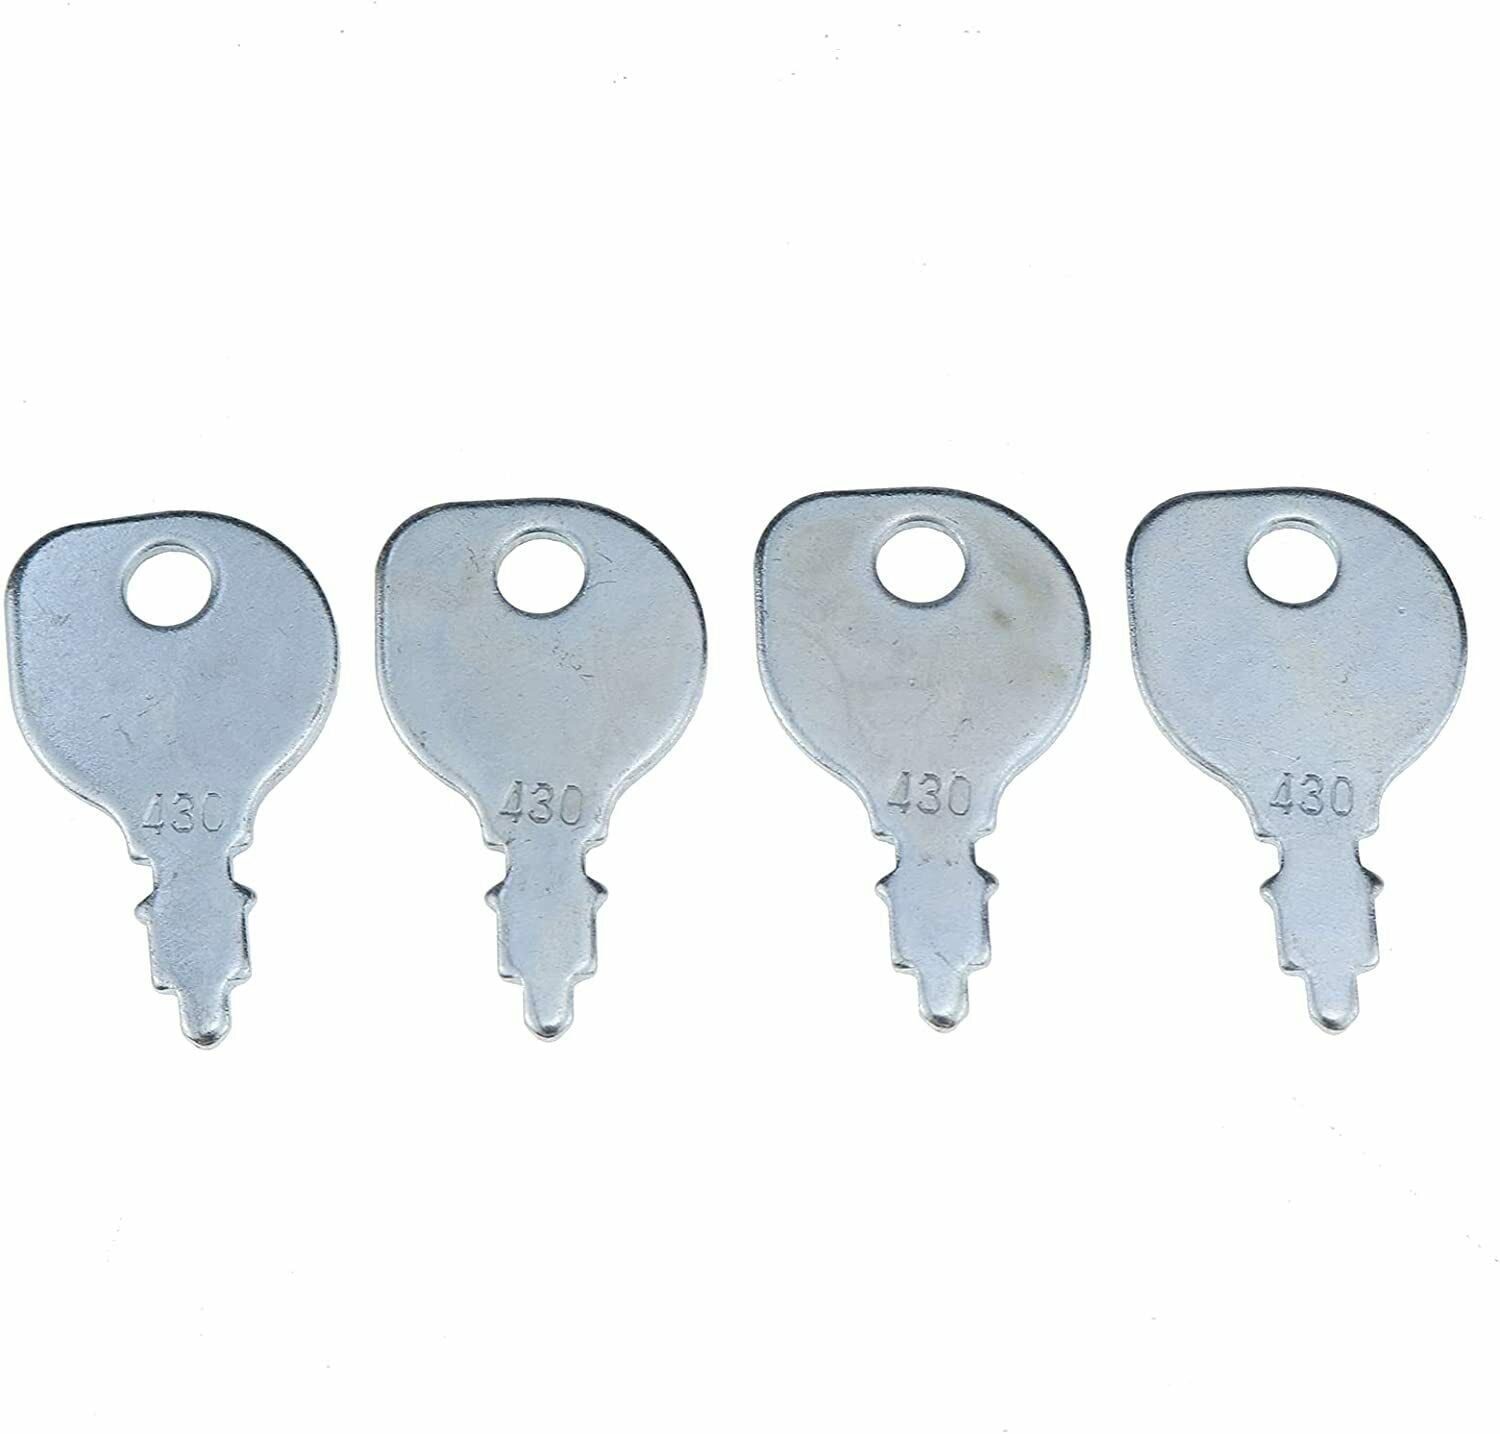 Replacement Indak Ignition Key Rotary 2932 Lock Set of 2 Fits Most Lawnmowers for sale online 